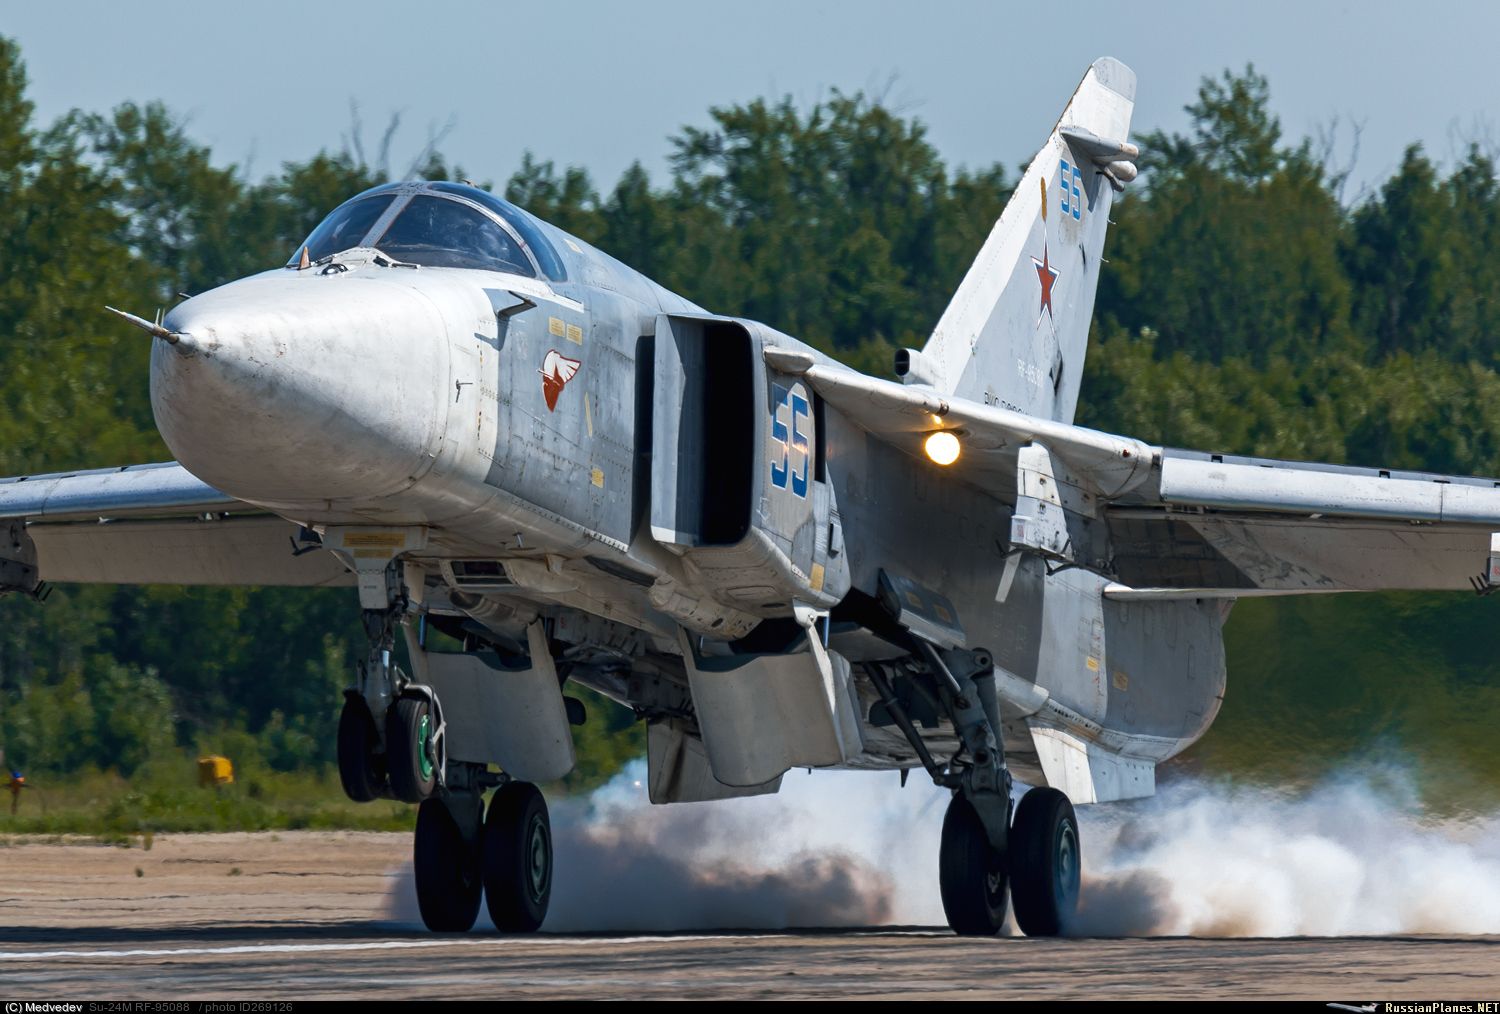 Losing 24 Of Best Fighter Jets Made Russia Turns Towards Outdated Aircraft